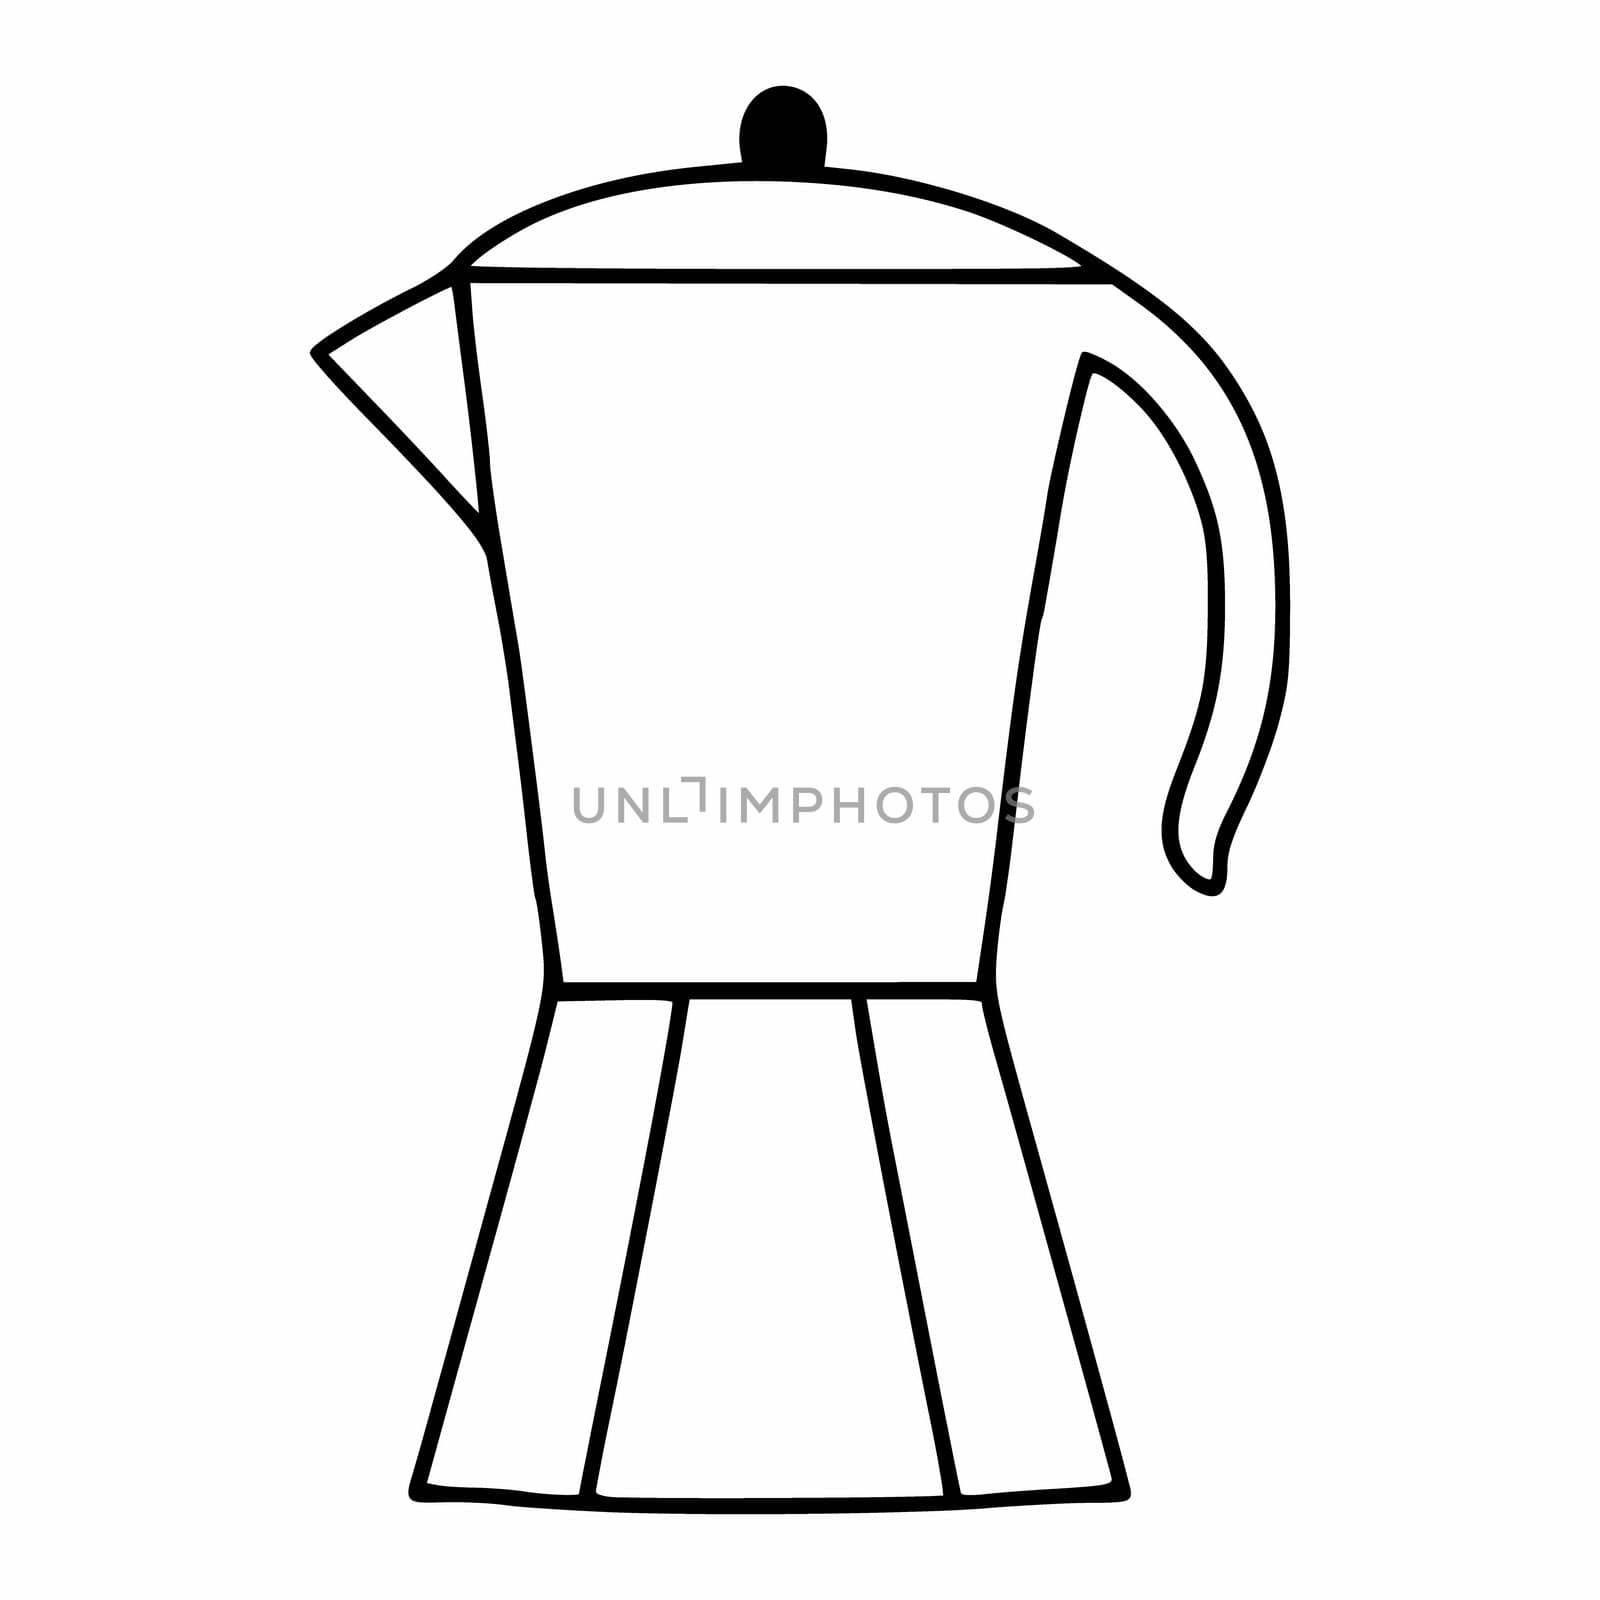 Coffee maker for making quick coffee. A doodle-style coffee machine. Kitchen electric appliance. by polinka_art